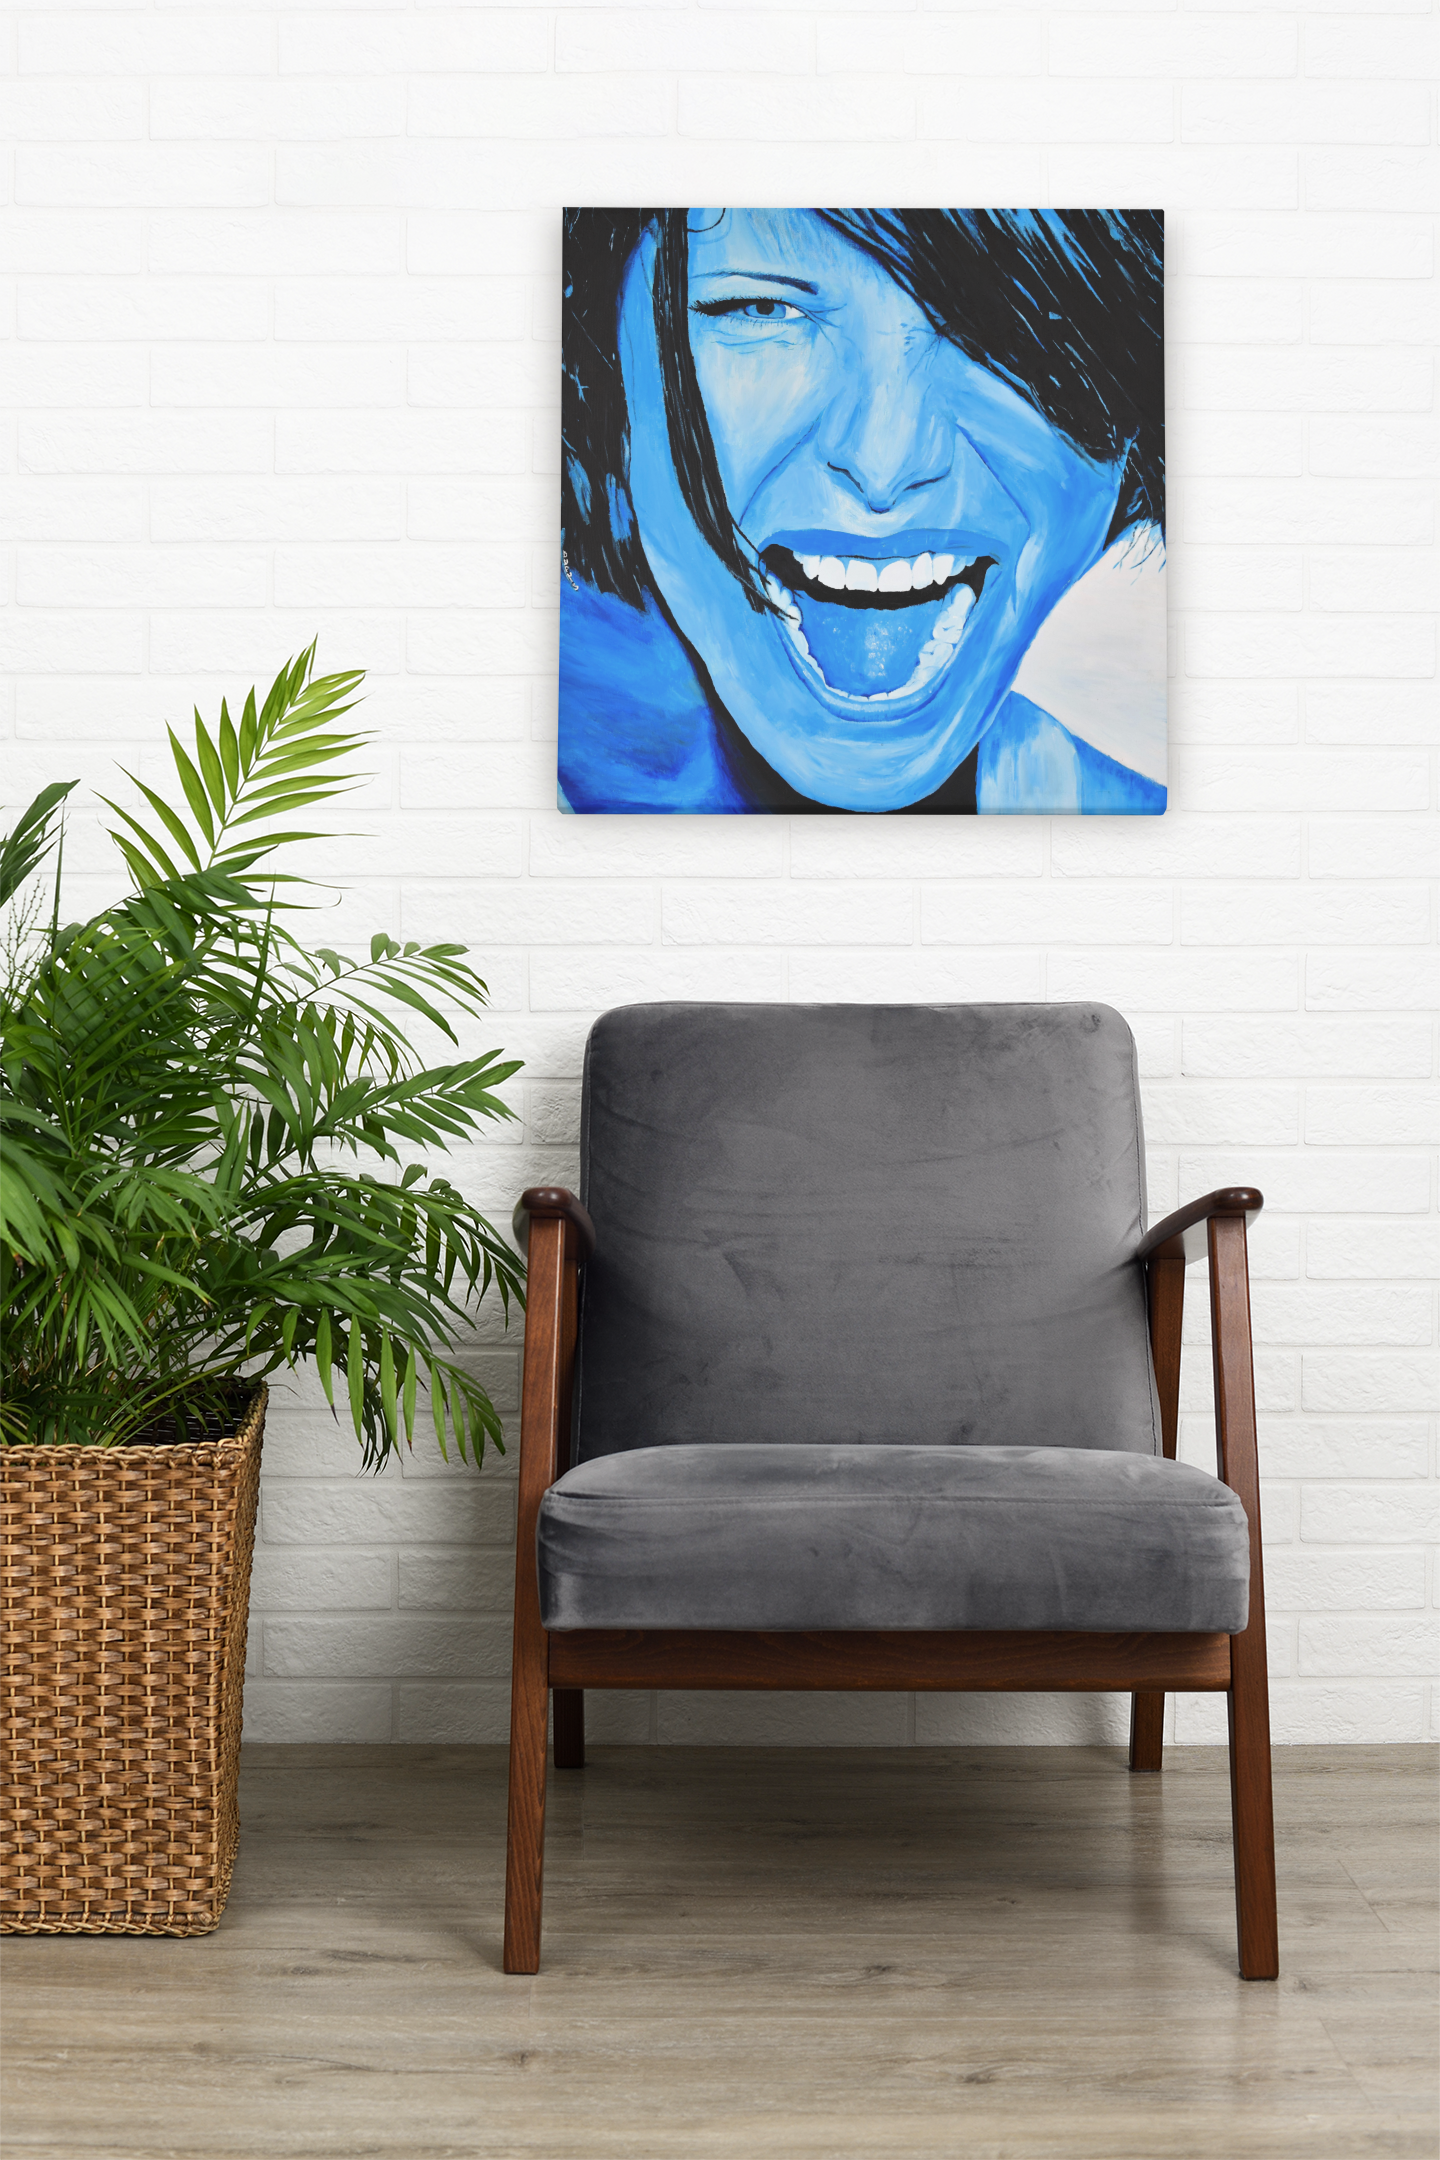 An art print on canvas of a passionate woman showing emotions, painted in blue, hanging on the wall over a living room chair next to a plant